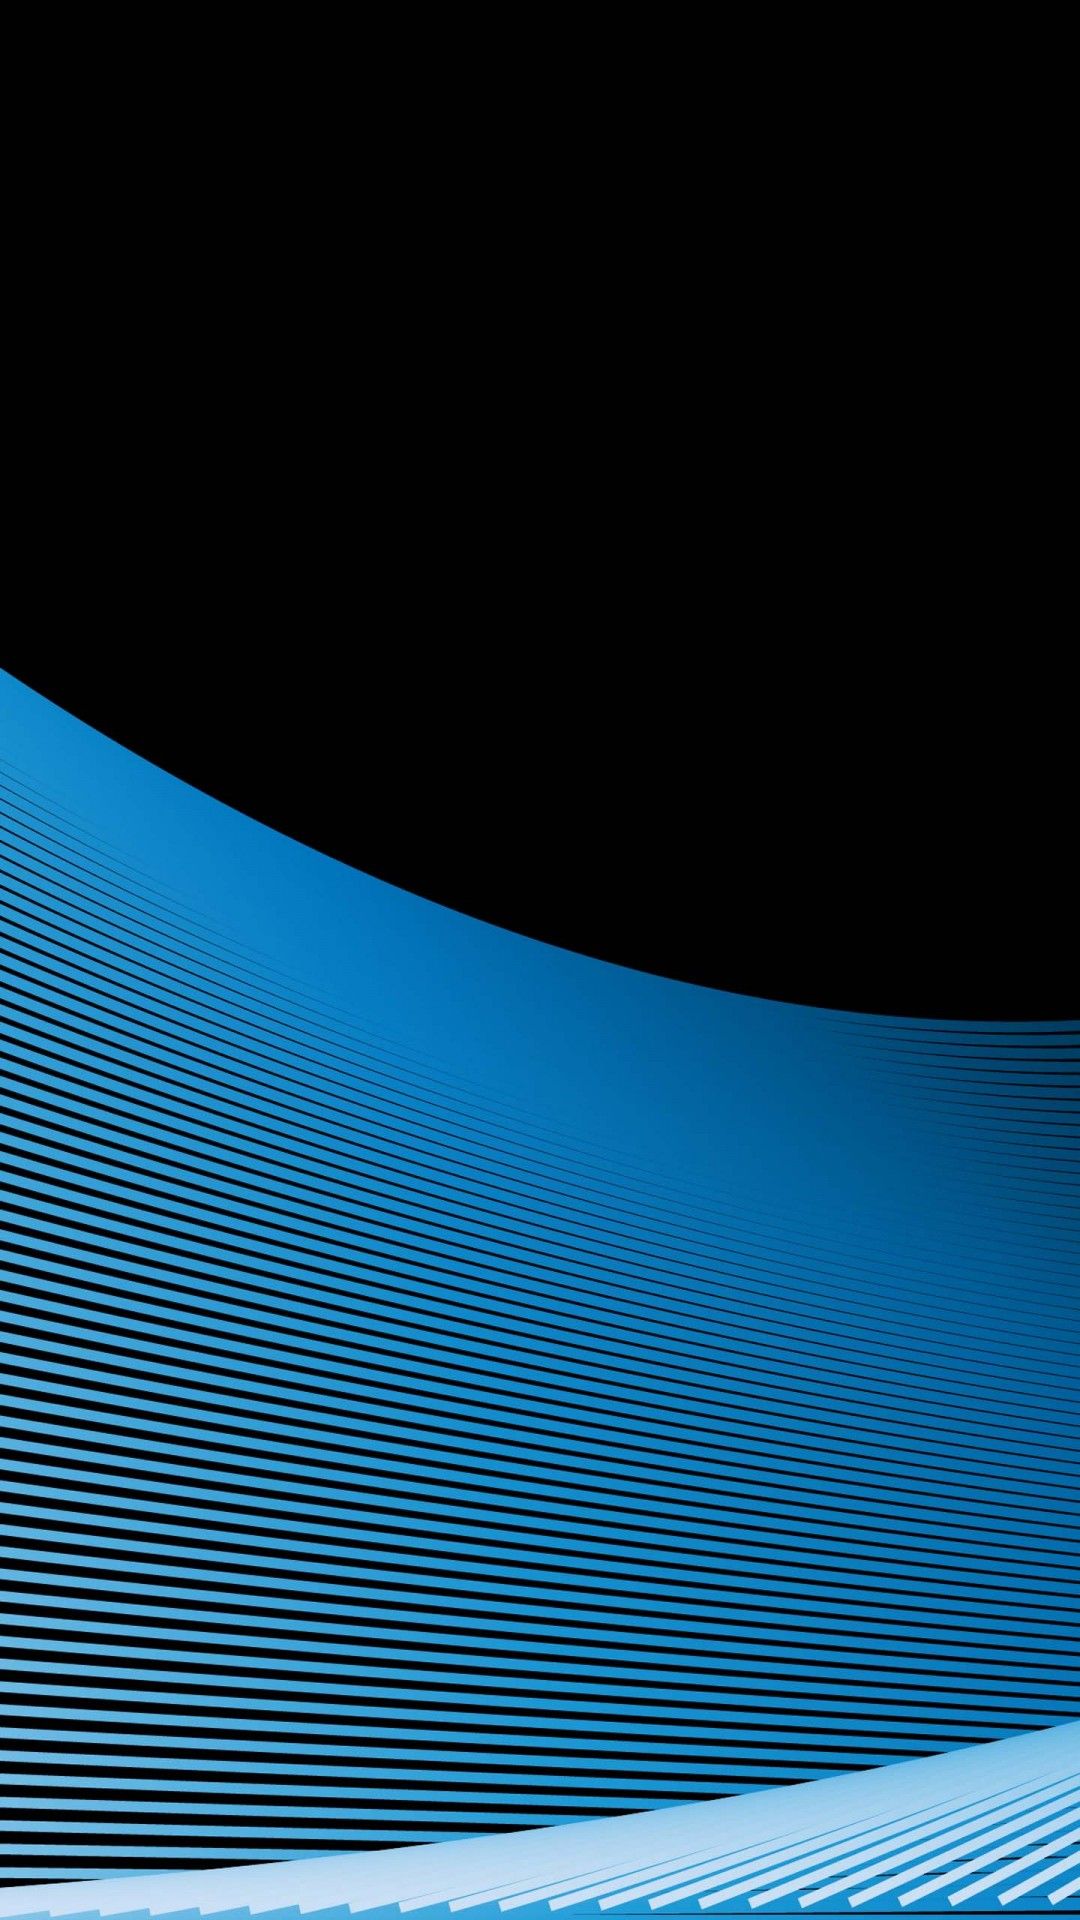 Black And Blue Abstract Wallpaper 4K / Black And Blue Abstract Wallpaper Top Free Black And Blue Abstract Background you can get the best black and blue abstract wallpaper